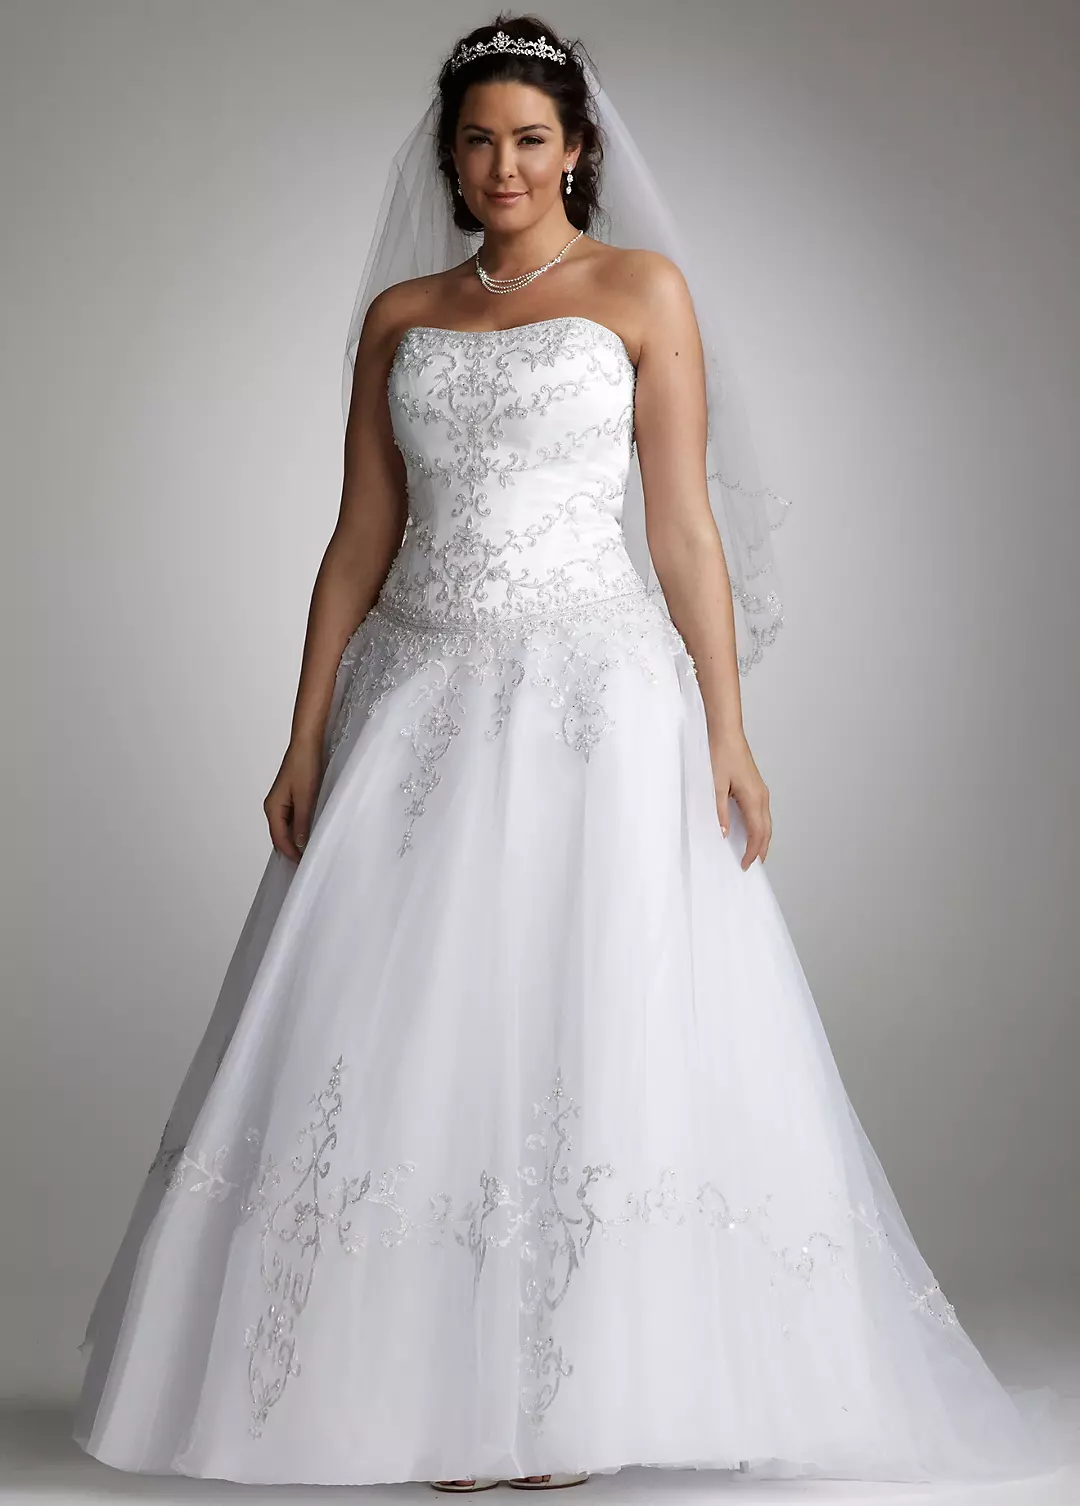 Extra Length Tulle Ball Gown with Satin Bodice Image